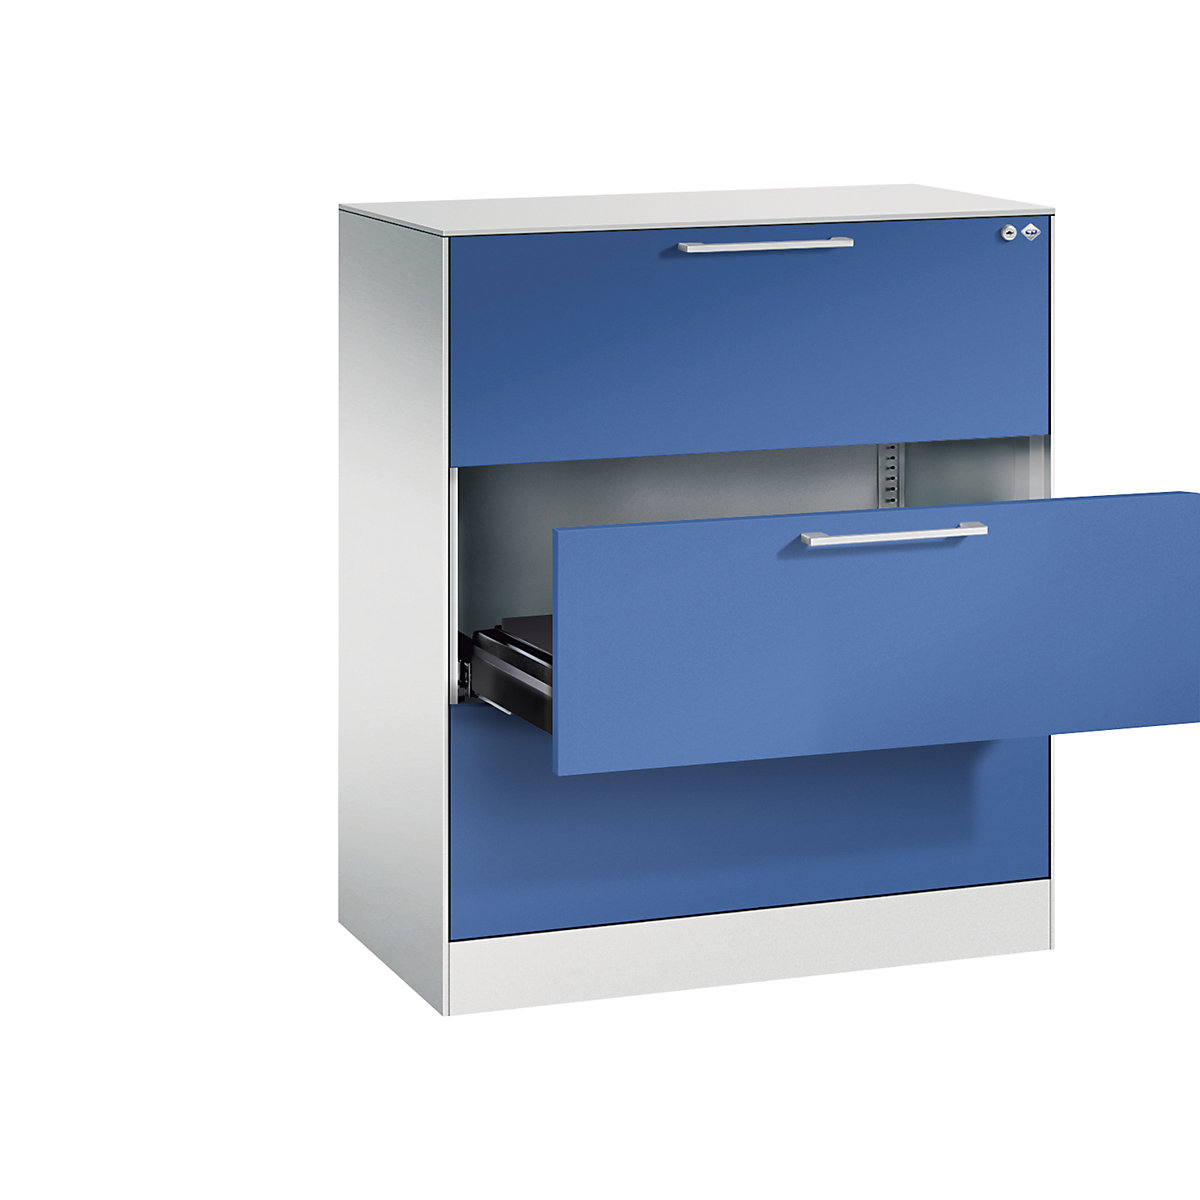 ASISTO card file cabinet – C+P, height 992 mm, with 3 drawers, A4 landscape, light grey/gentian blue-17